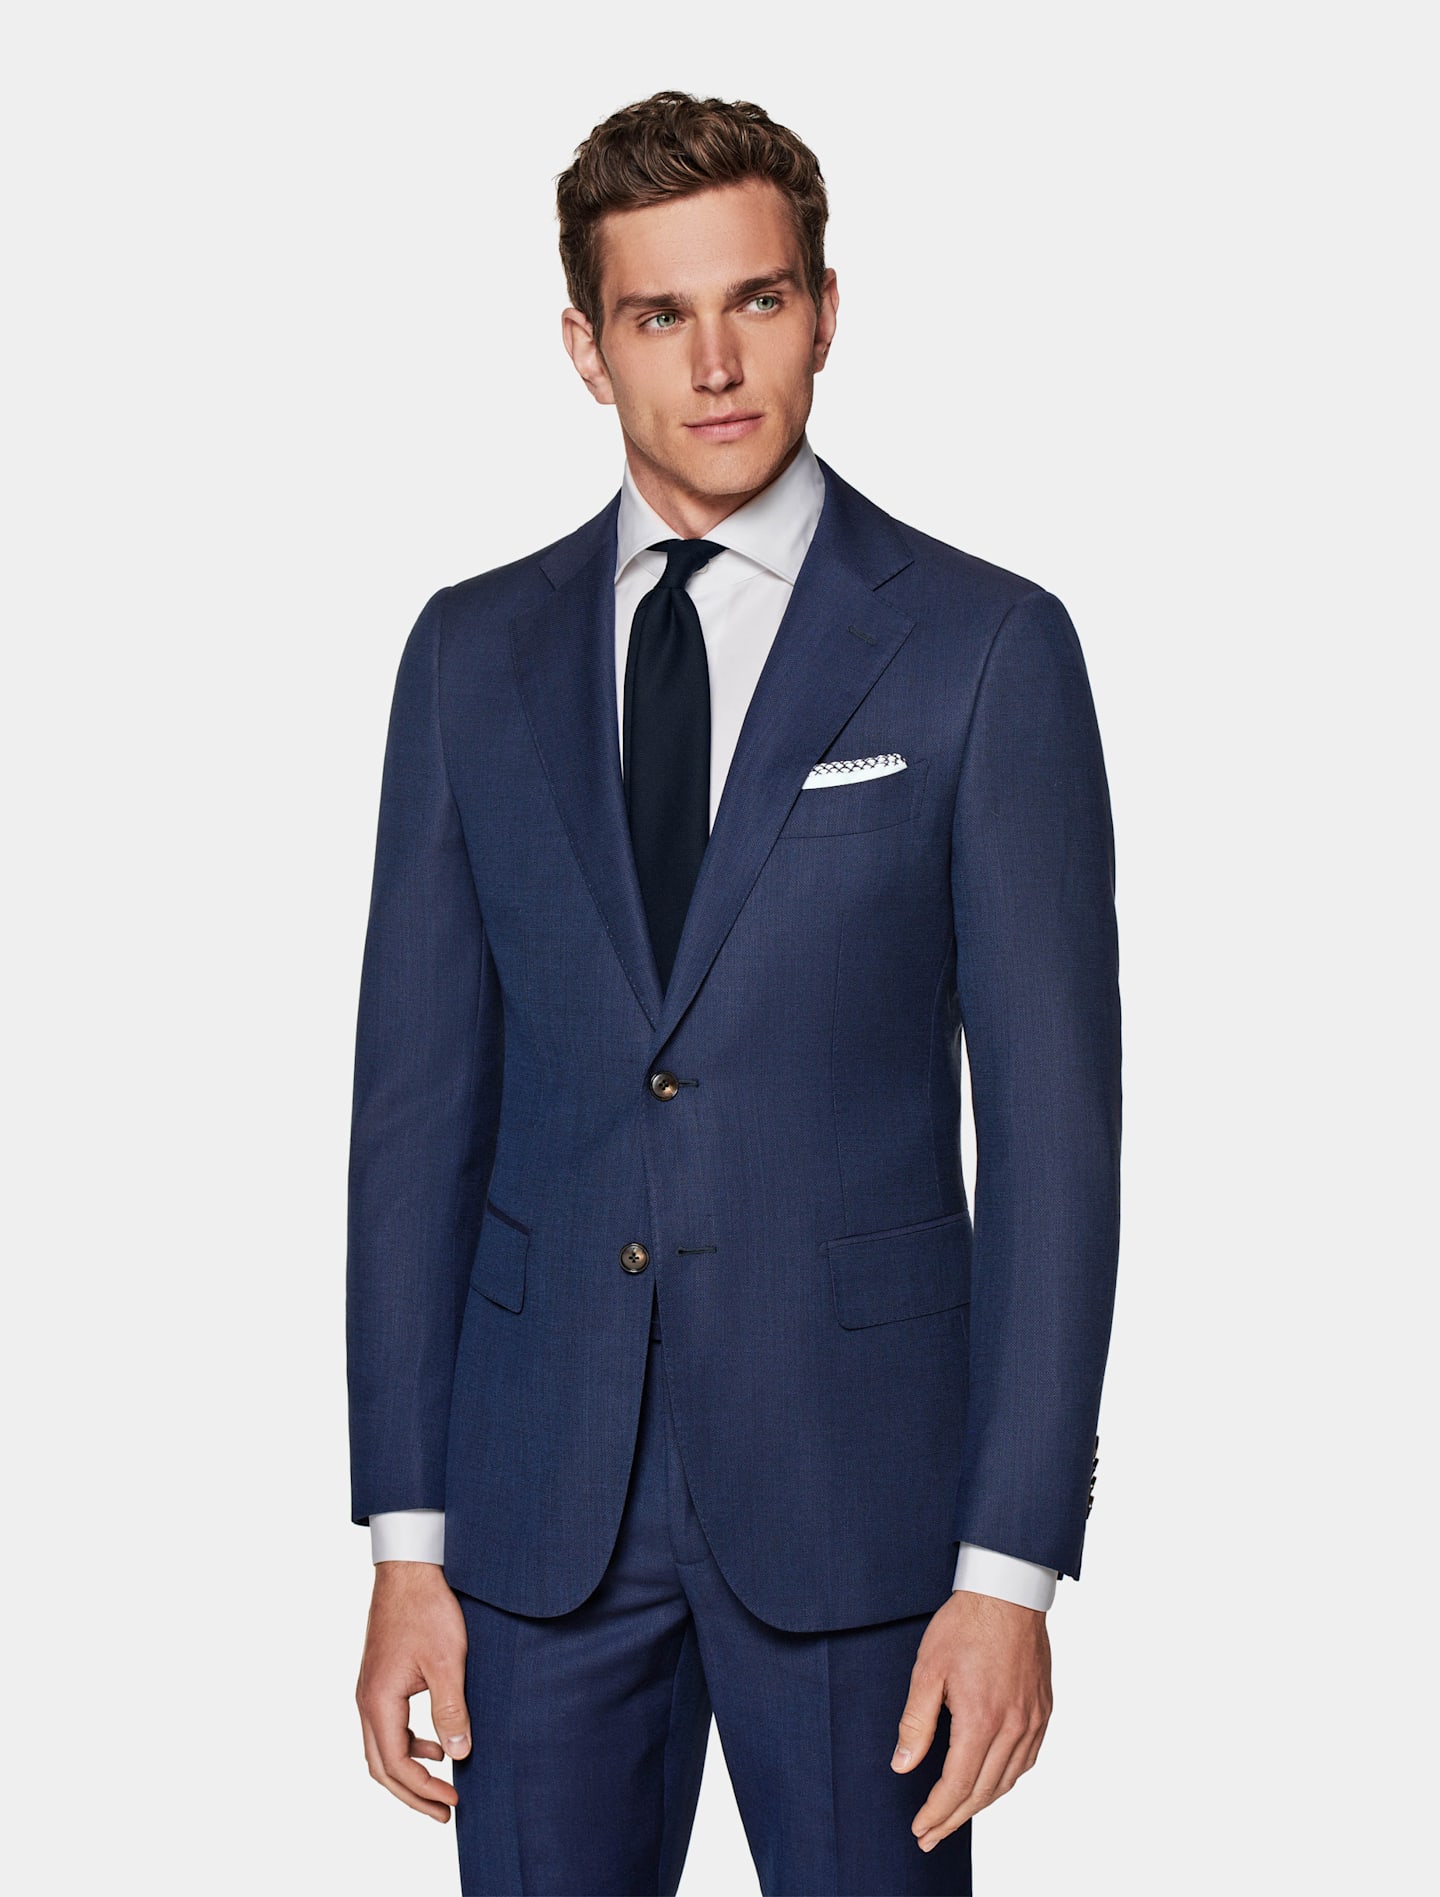 Navy suit for formal occasions, such as weddings and funerals.